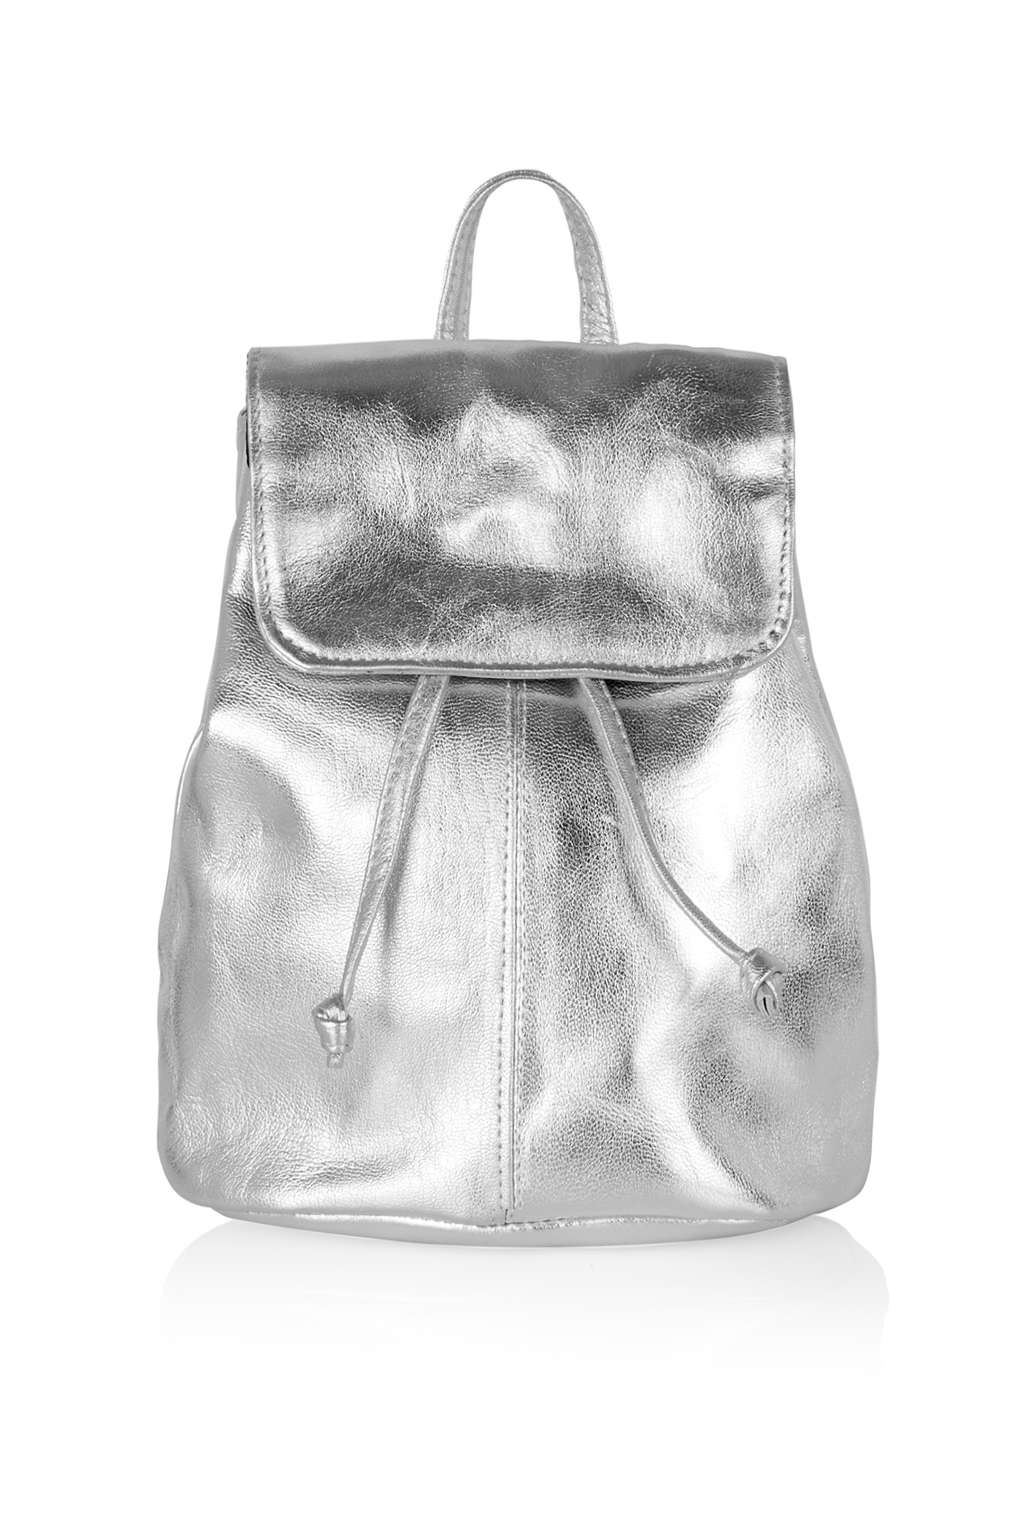 Lyst - Topshop Mini Leather Backpack in Metallic